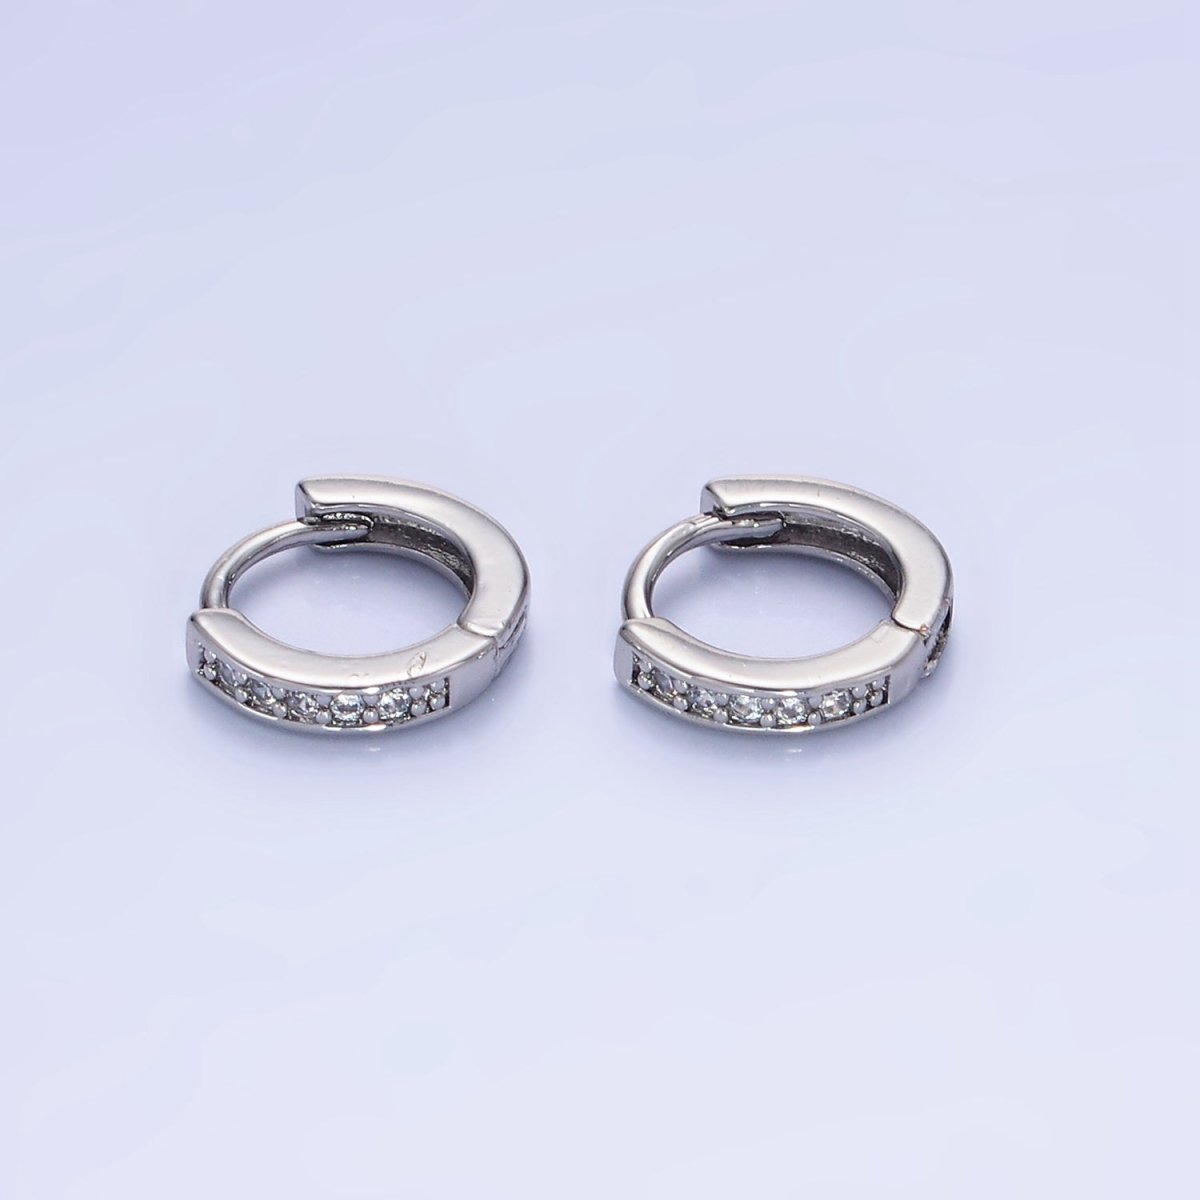 14K Gold Filled 10mm CZ Lined Cartilage Huggie Earrings in Gold & Silver | AB1346 AB1347 - DLUXCA